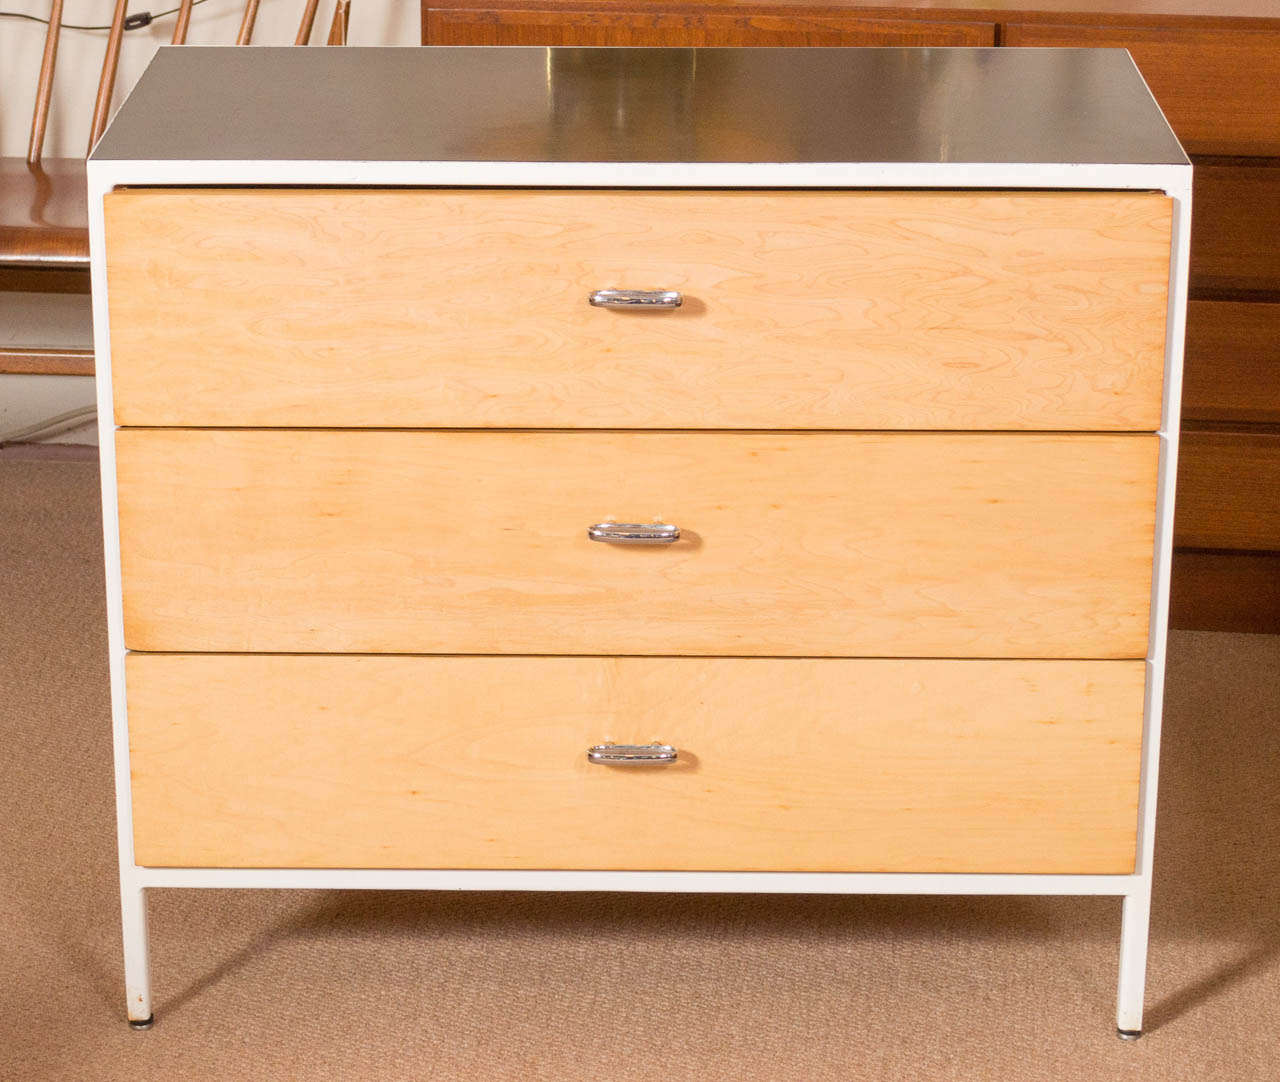 An iconic 1950's design by George Nelson, from the Steelframe line for Herman Miller. Dresser has three drawers,  white frame with a black formica top, the drawers have been refinished to it's natural wood. Does have a Herman Miller label on the